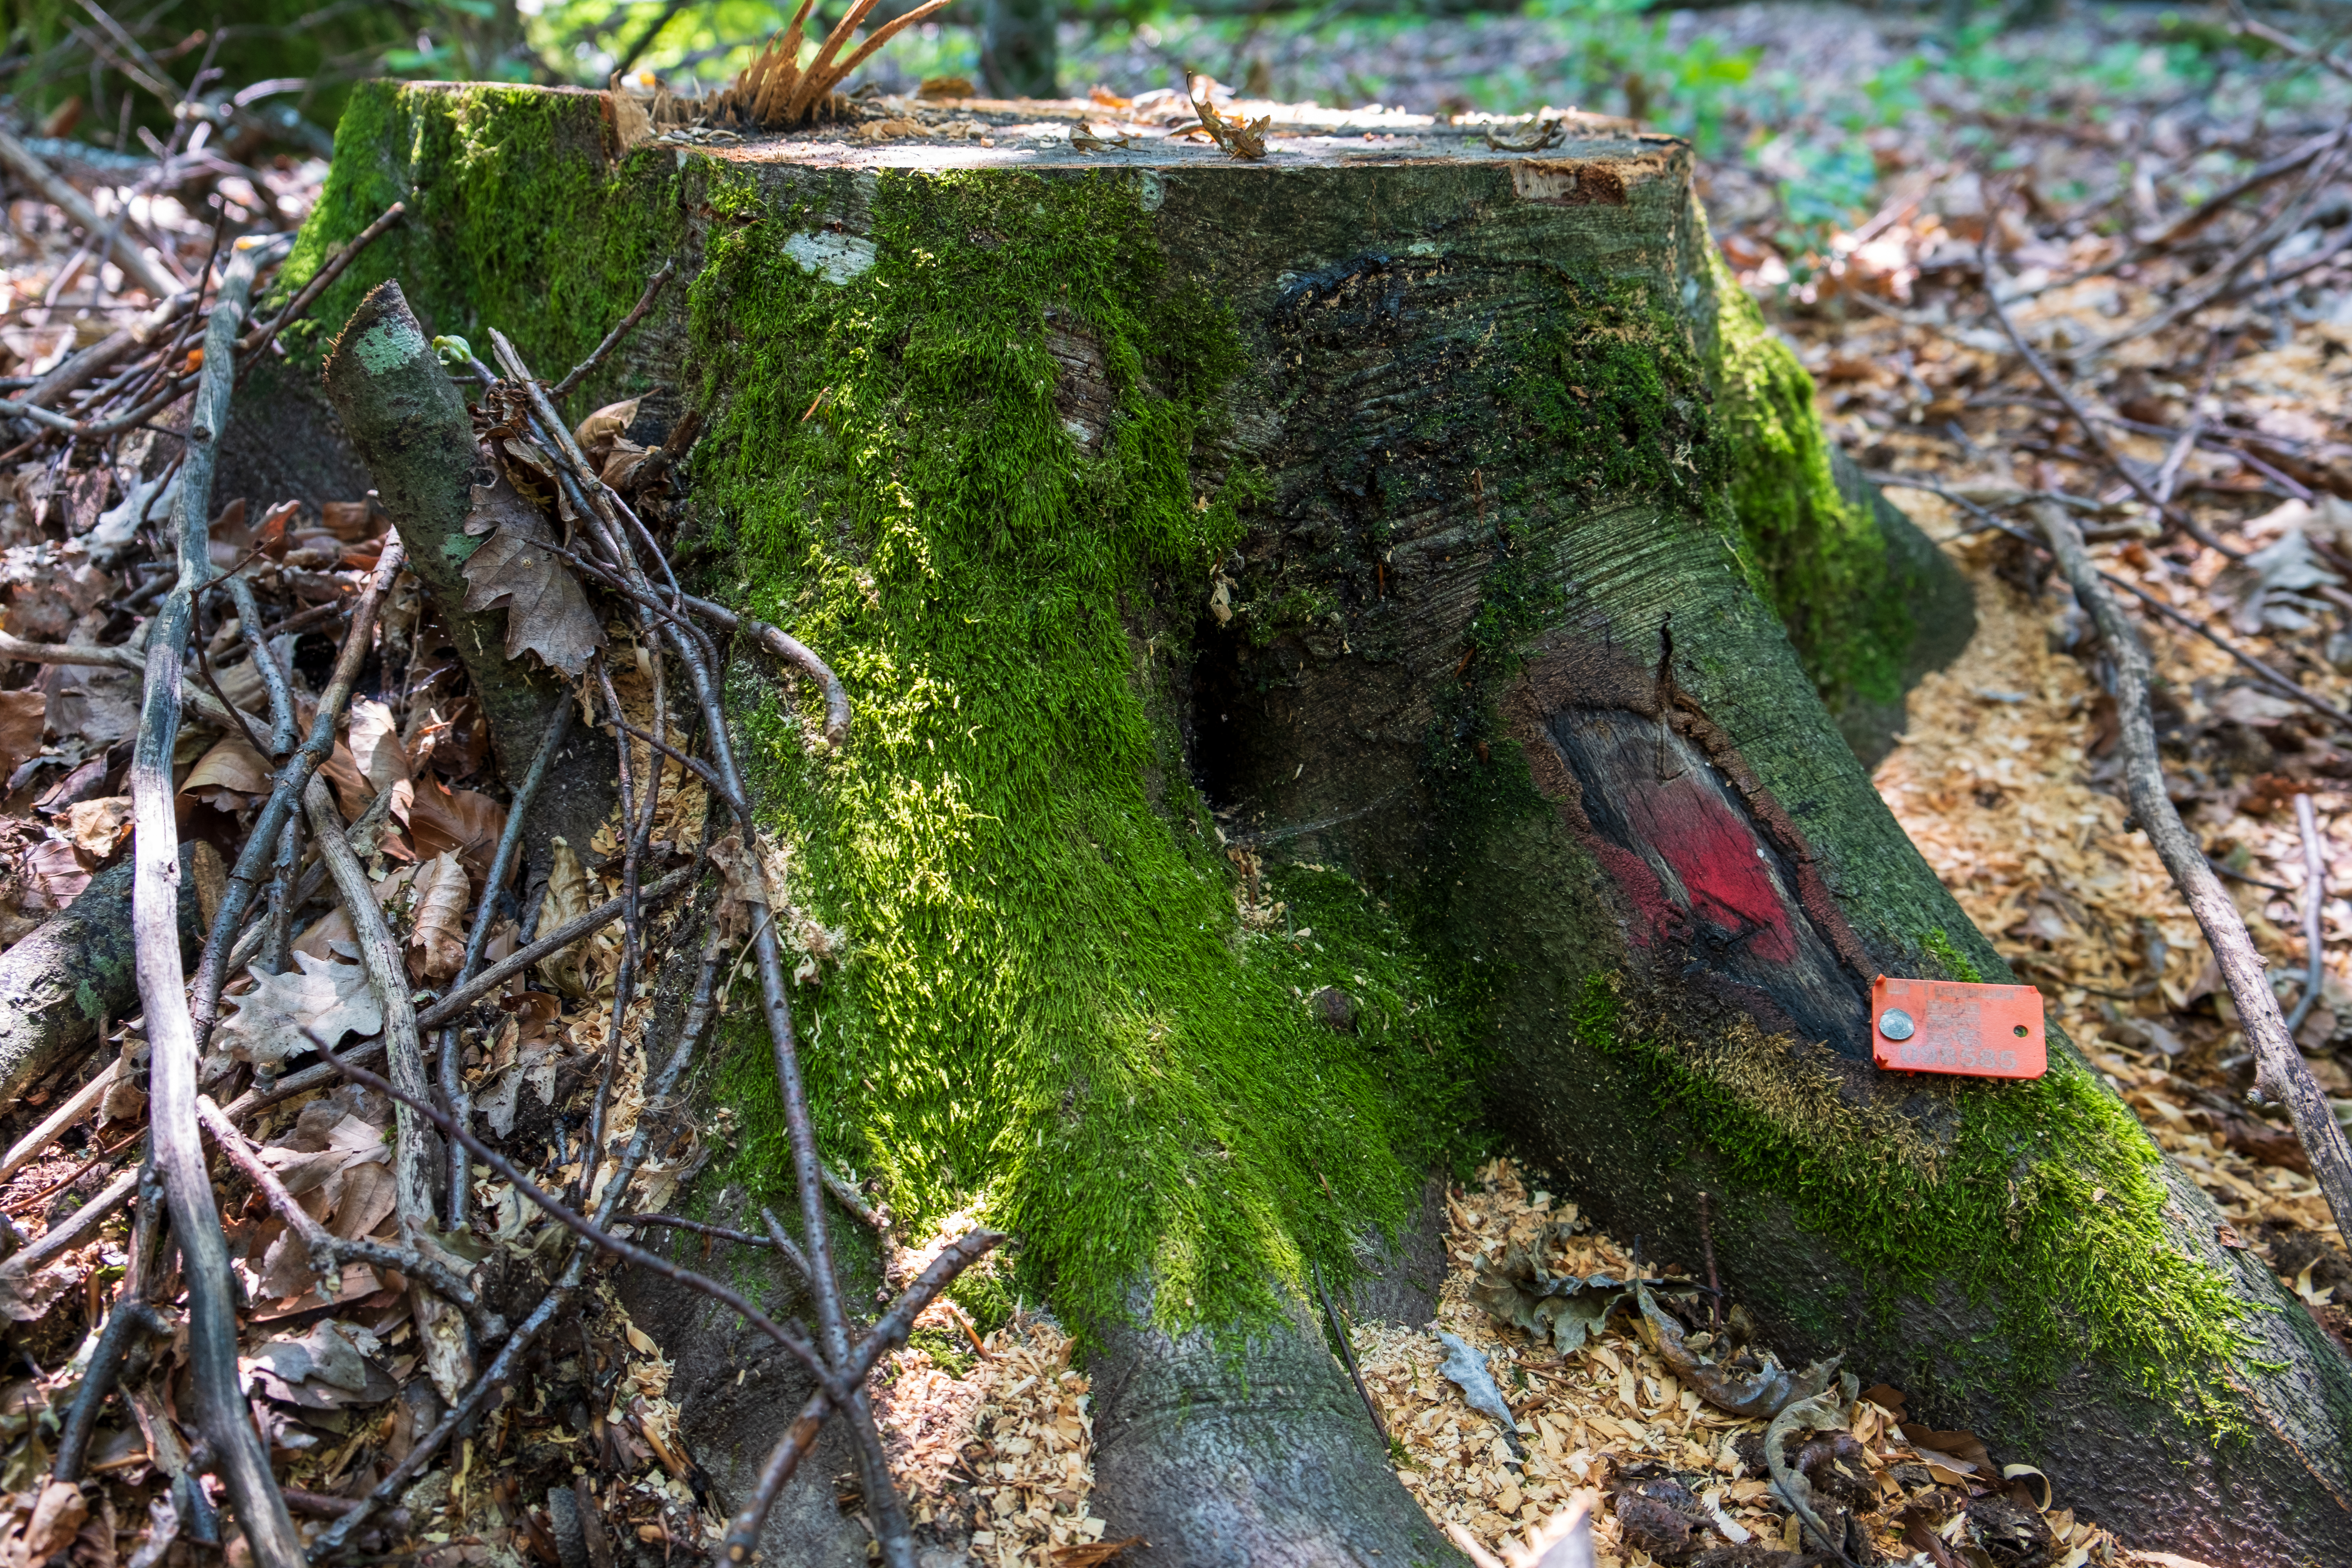 A tree stump with a tag placed there in the previous season when it was marked for future harvest, now used for pairing with felled wood assortments.